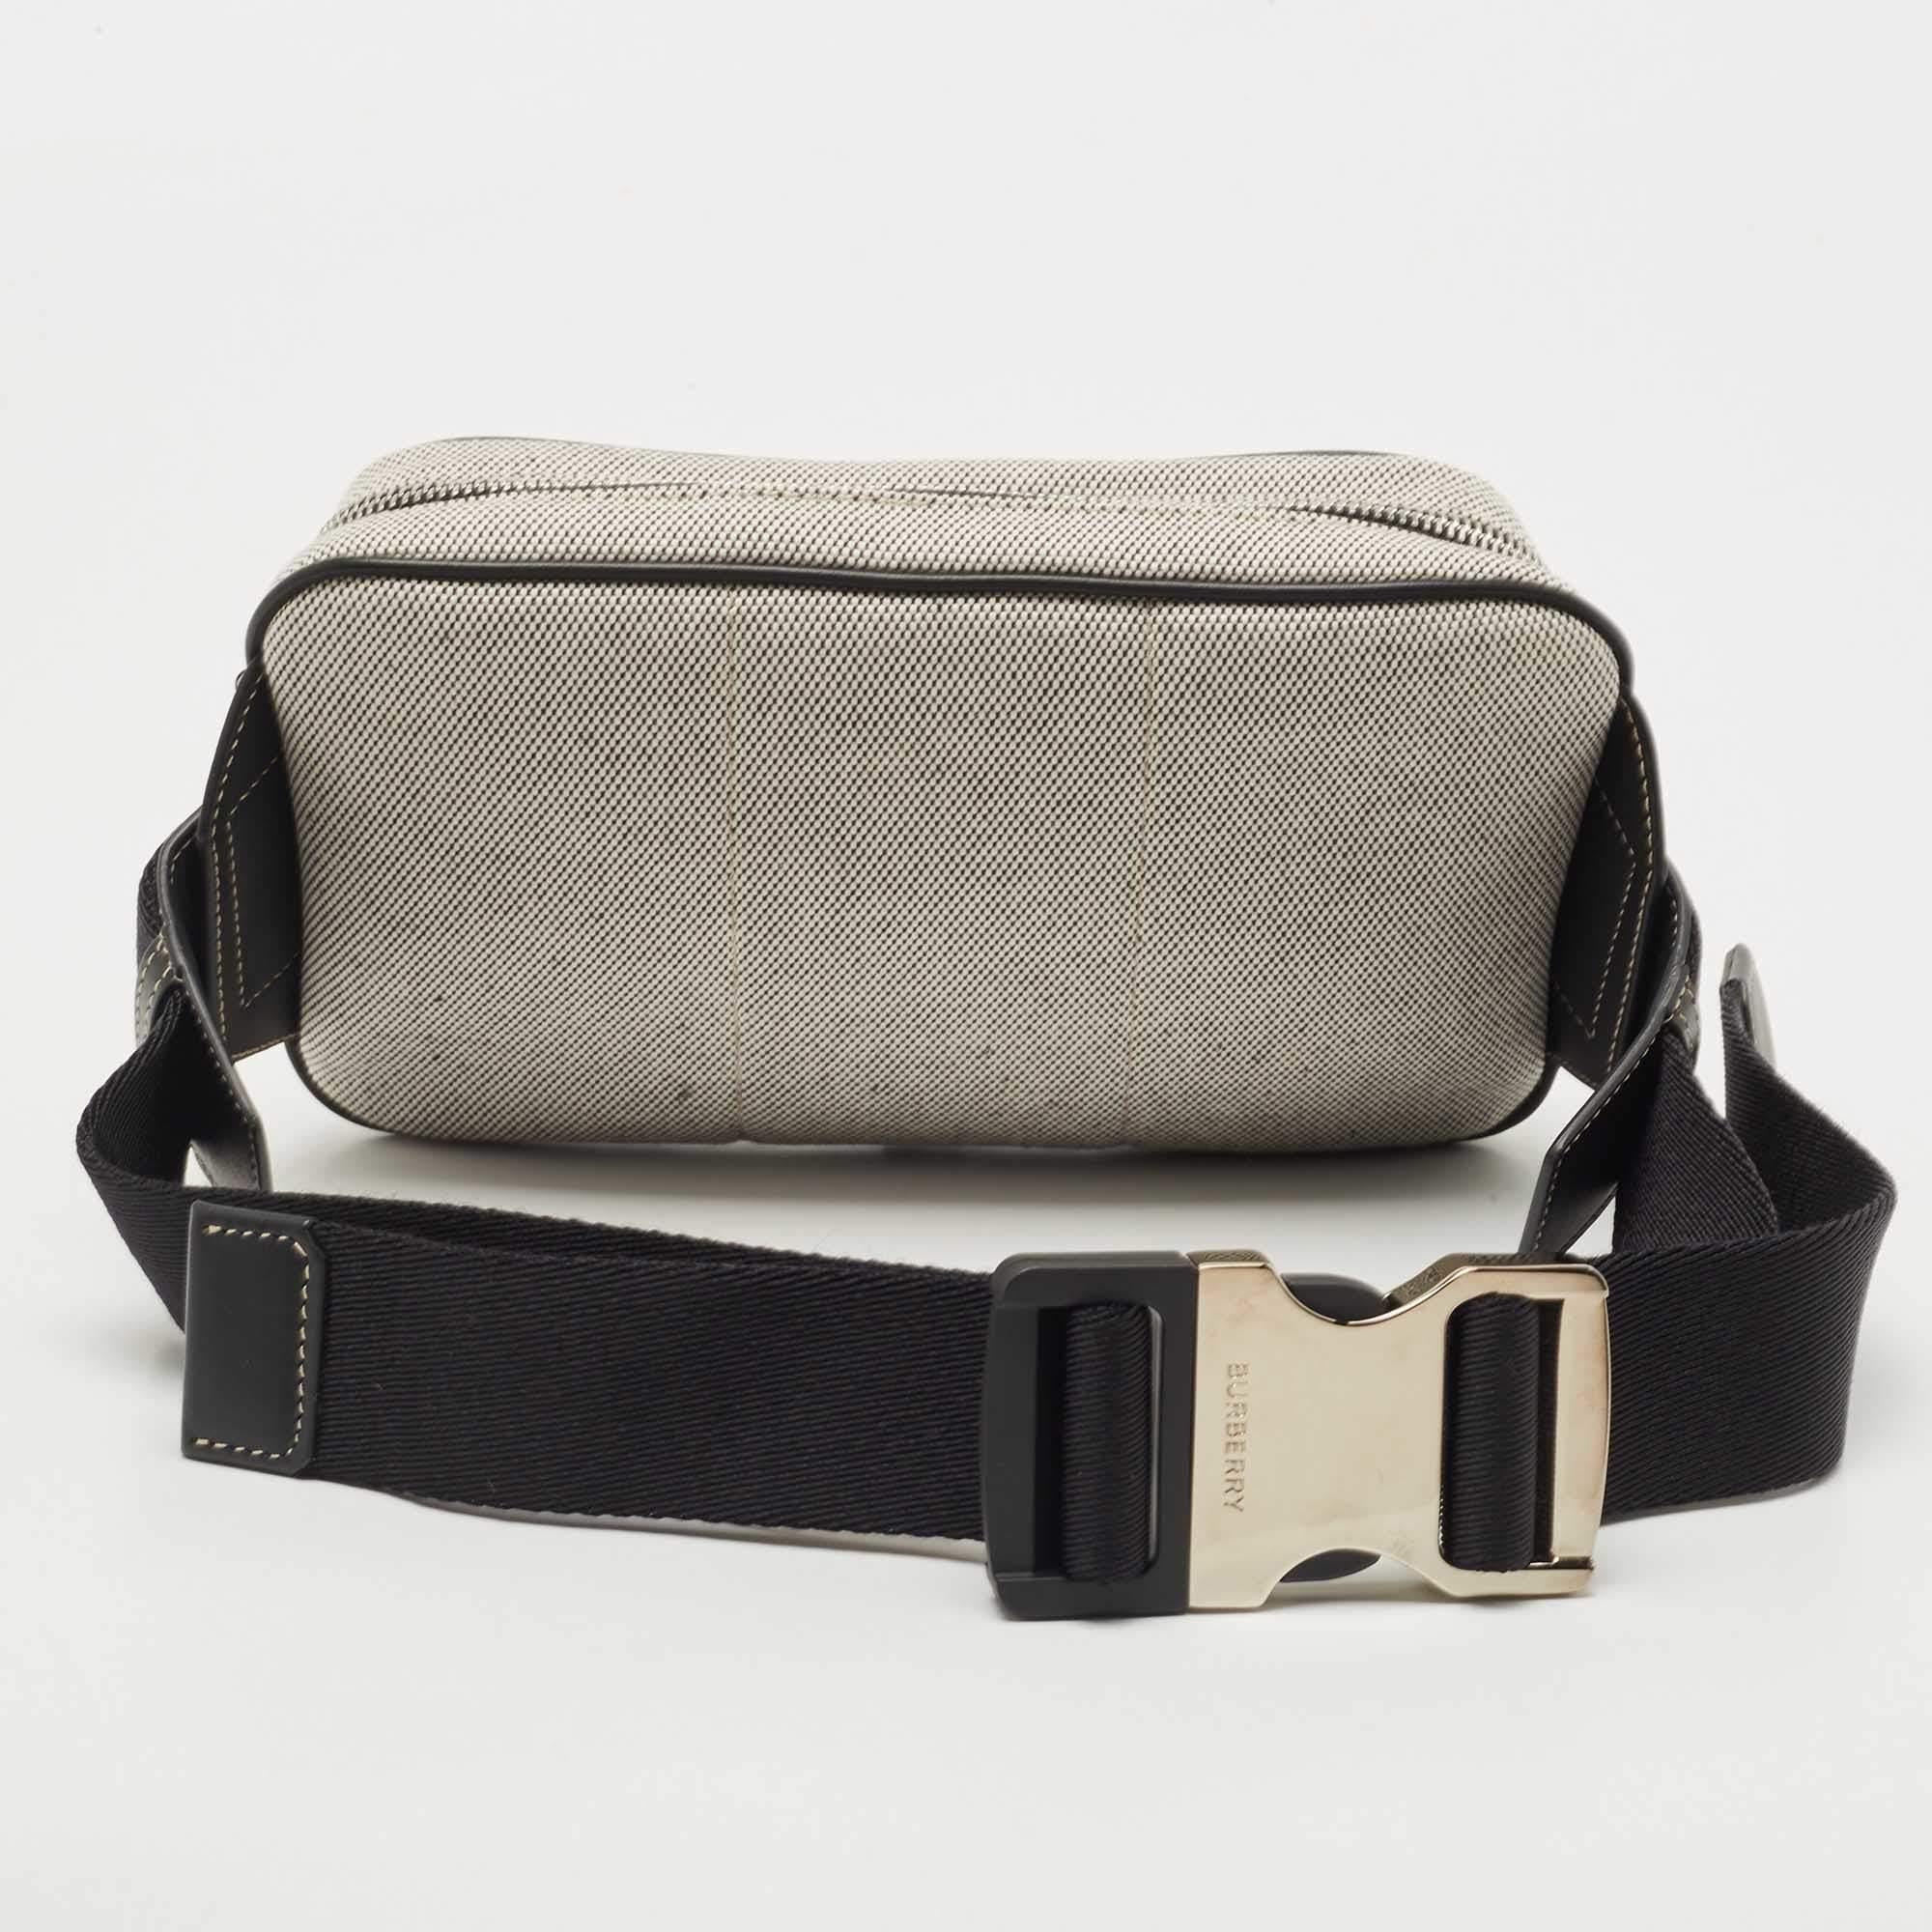 This West belt bag from the House of Burberry will help you obtain a comfortable and classy style! Designed using leather and canvas, this bag showcases luxe fittings with a spacious interior. Carry your belongings stylishly in this smart Burberry